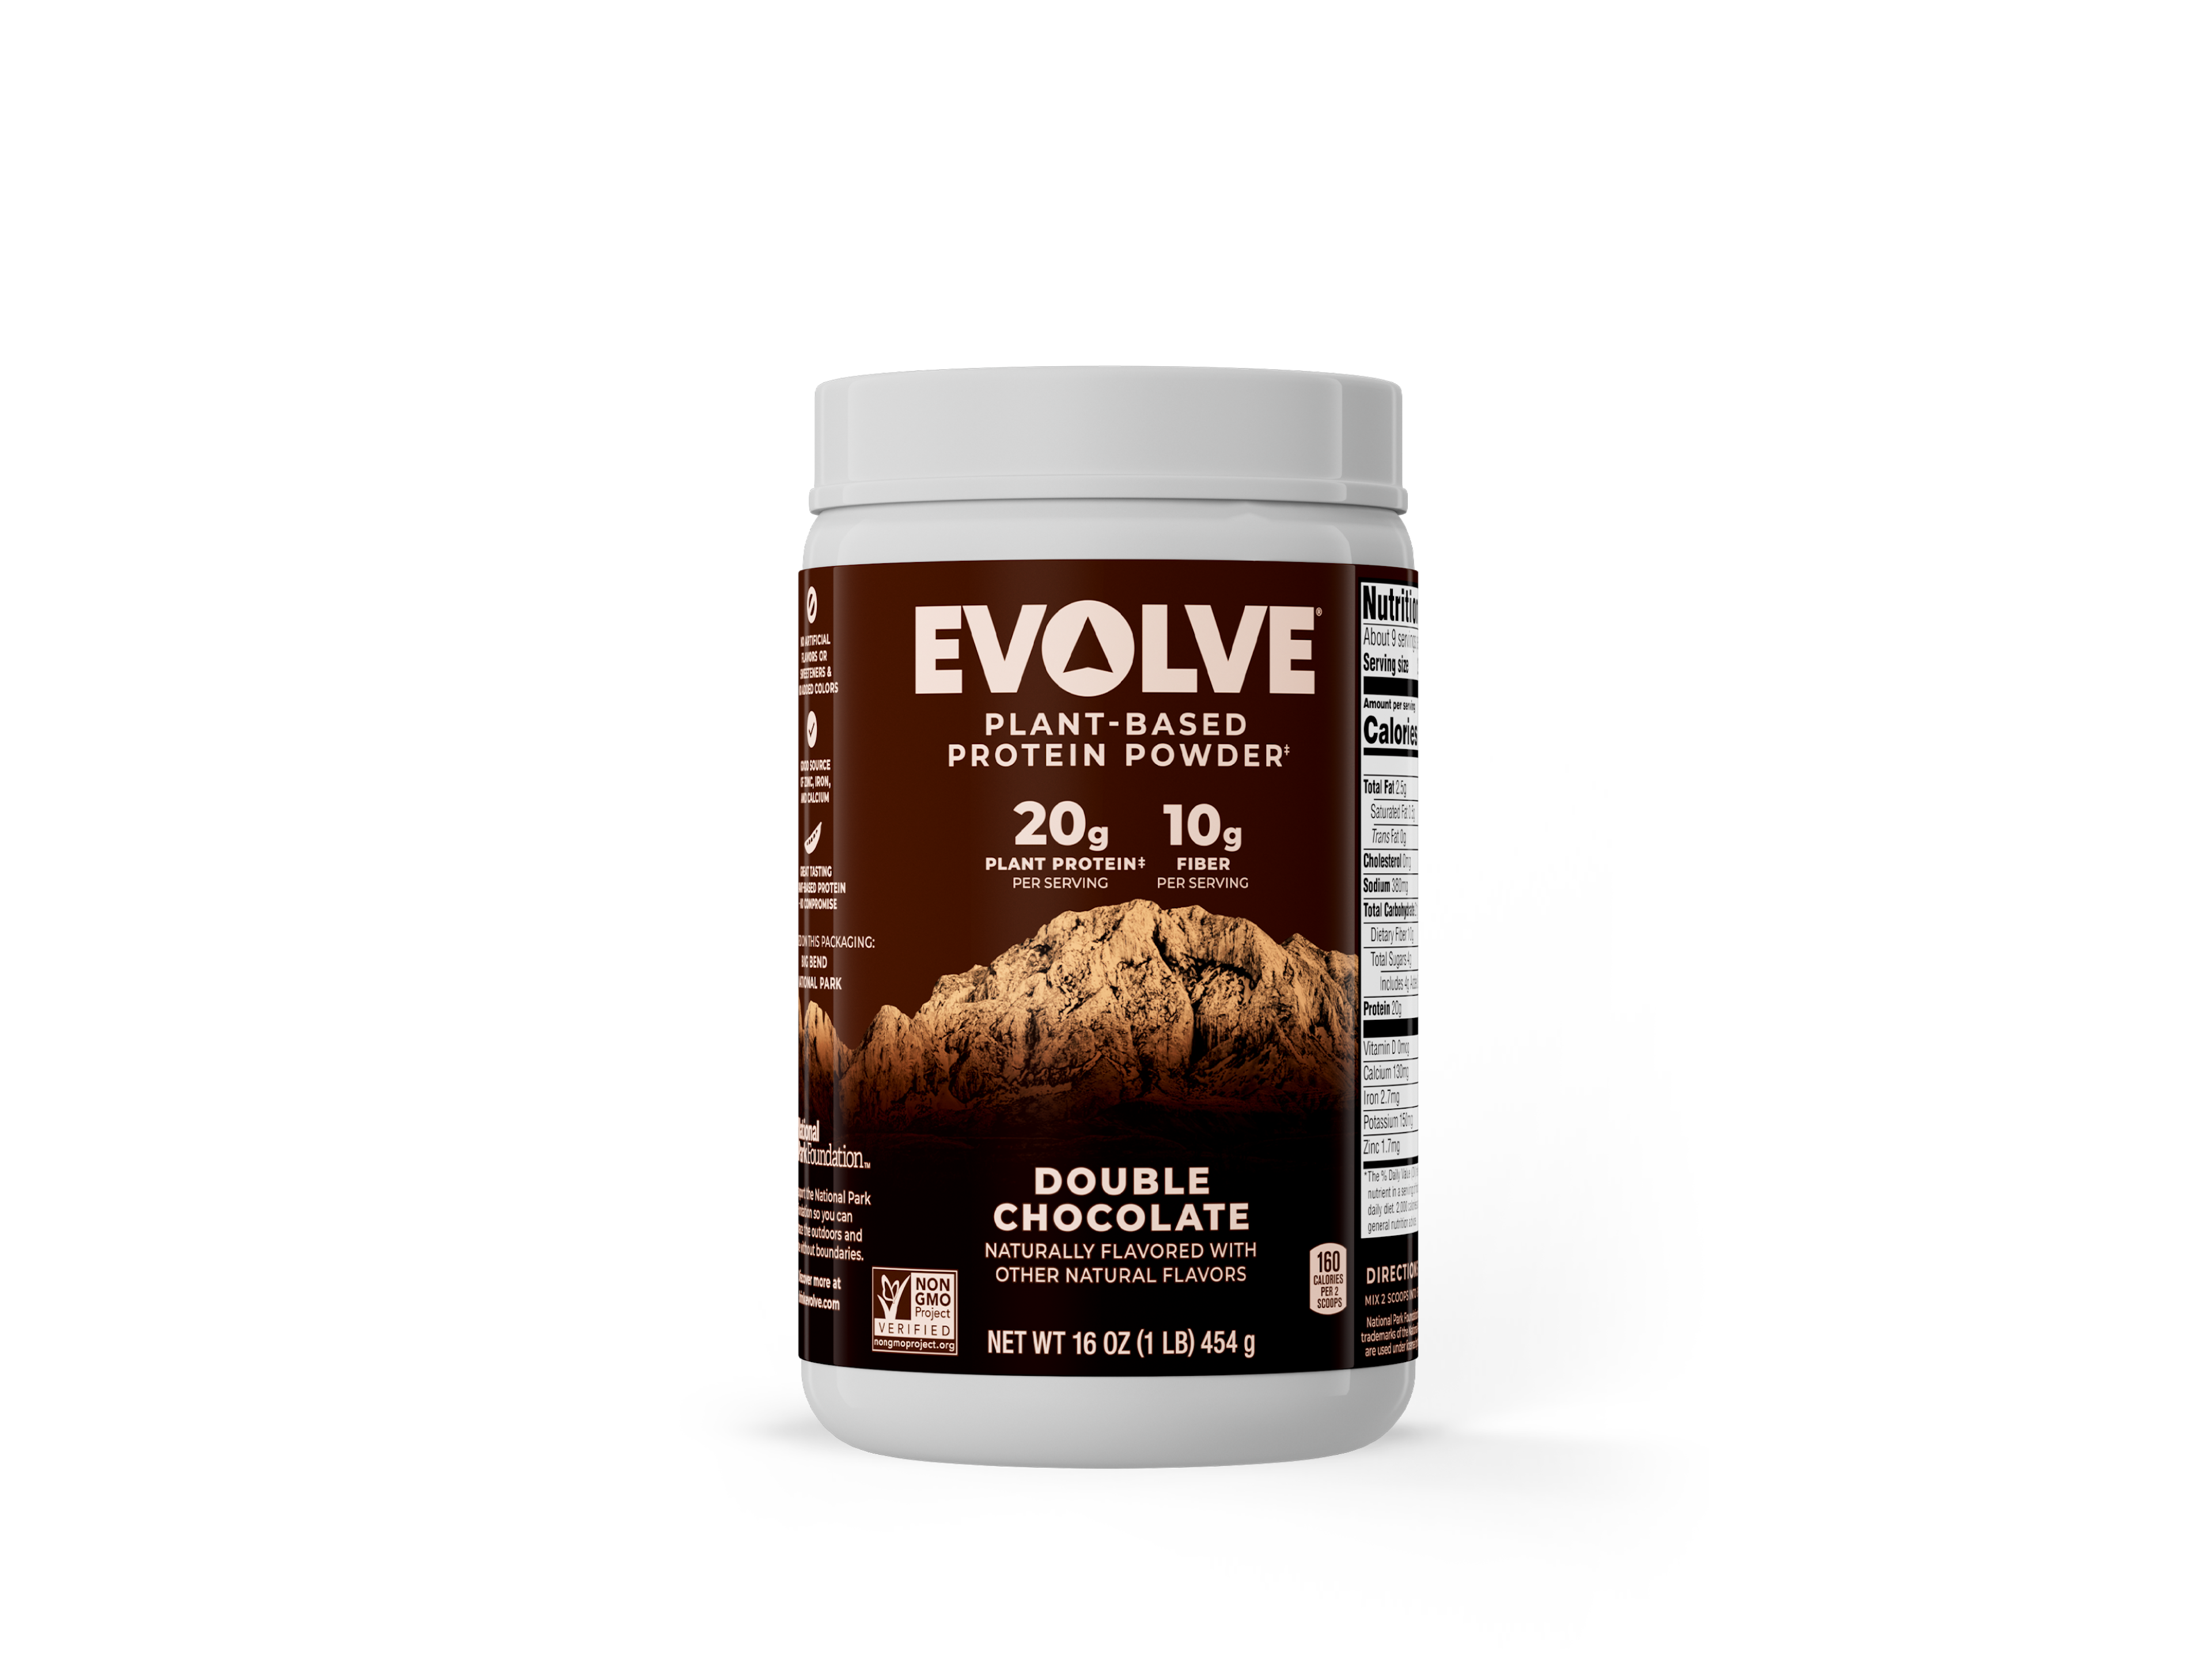 Evolve Plant-Based Protein Powder — Double Chocolate